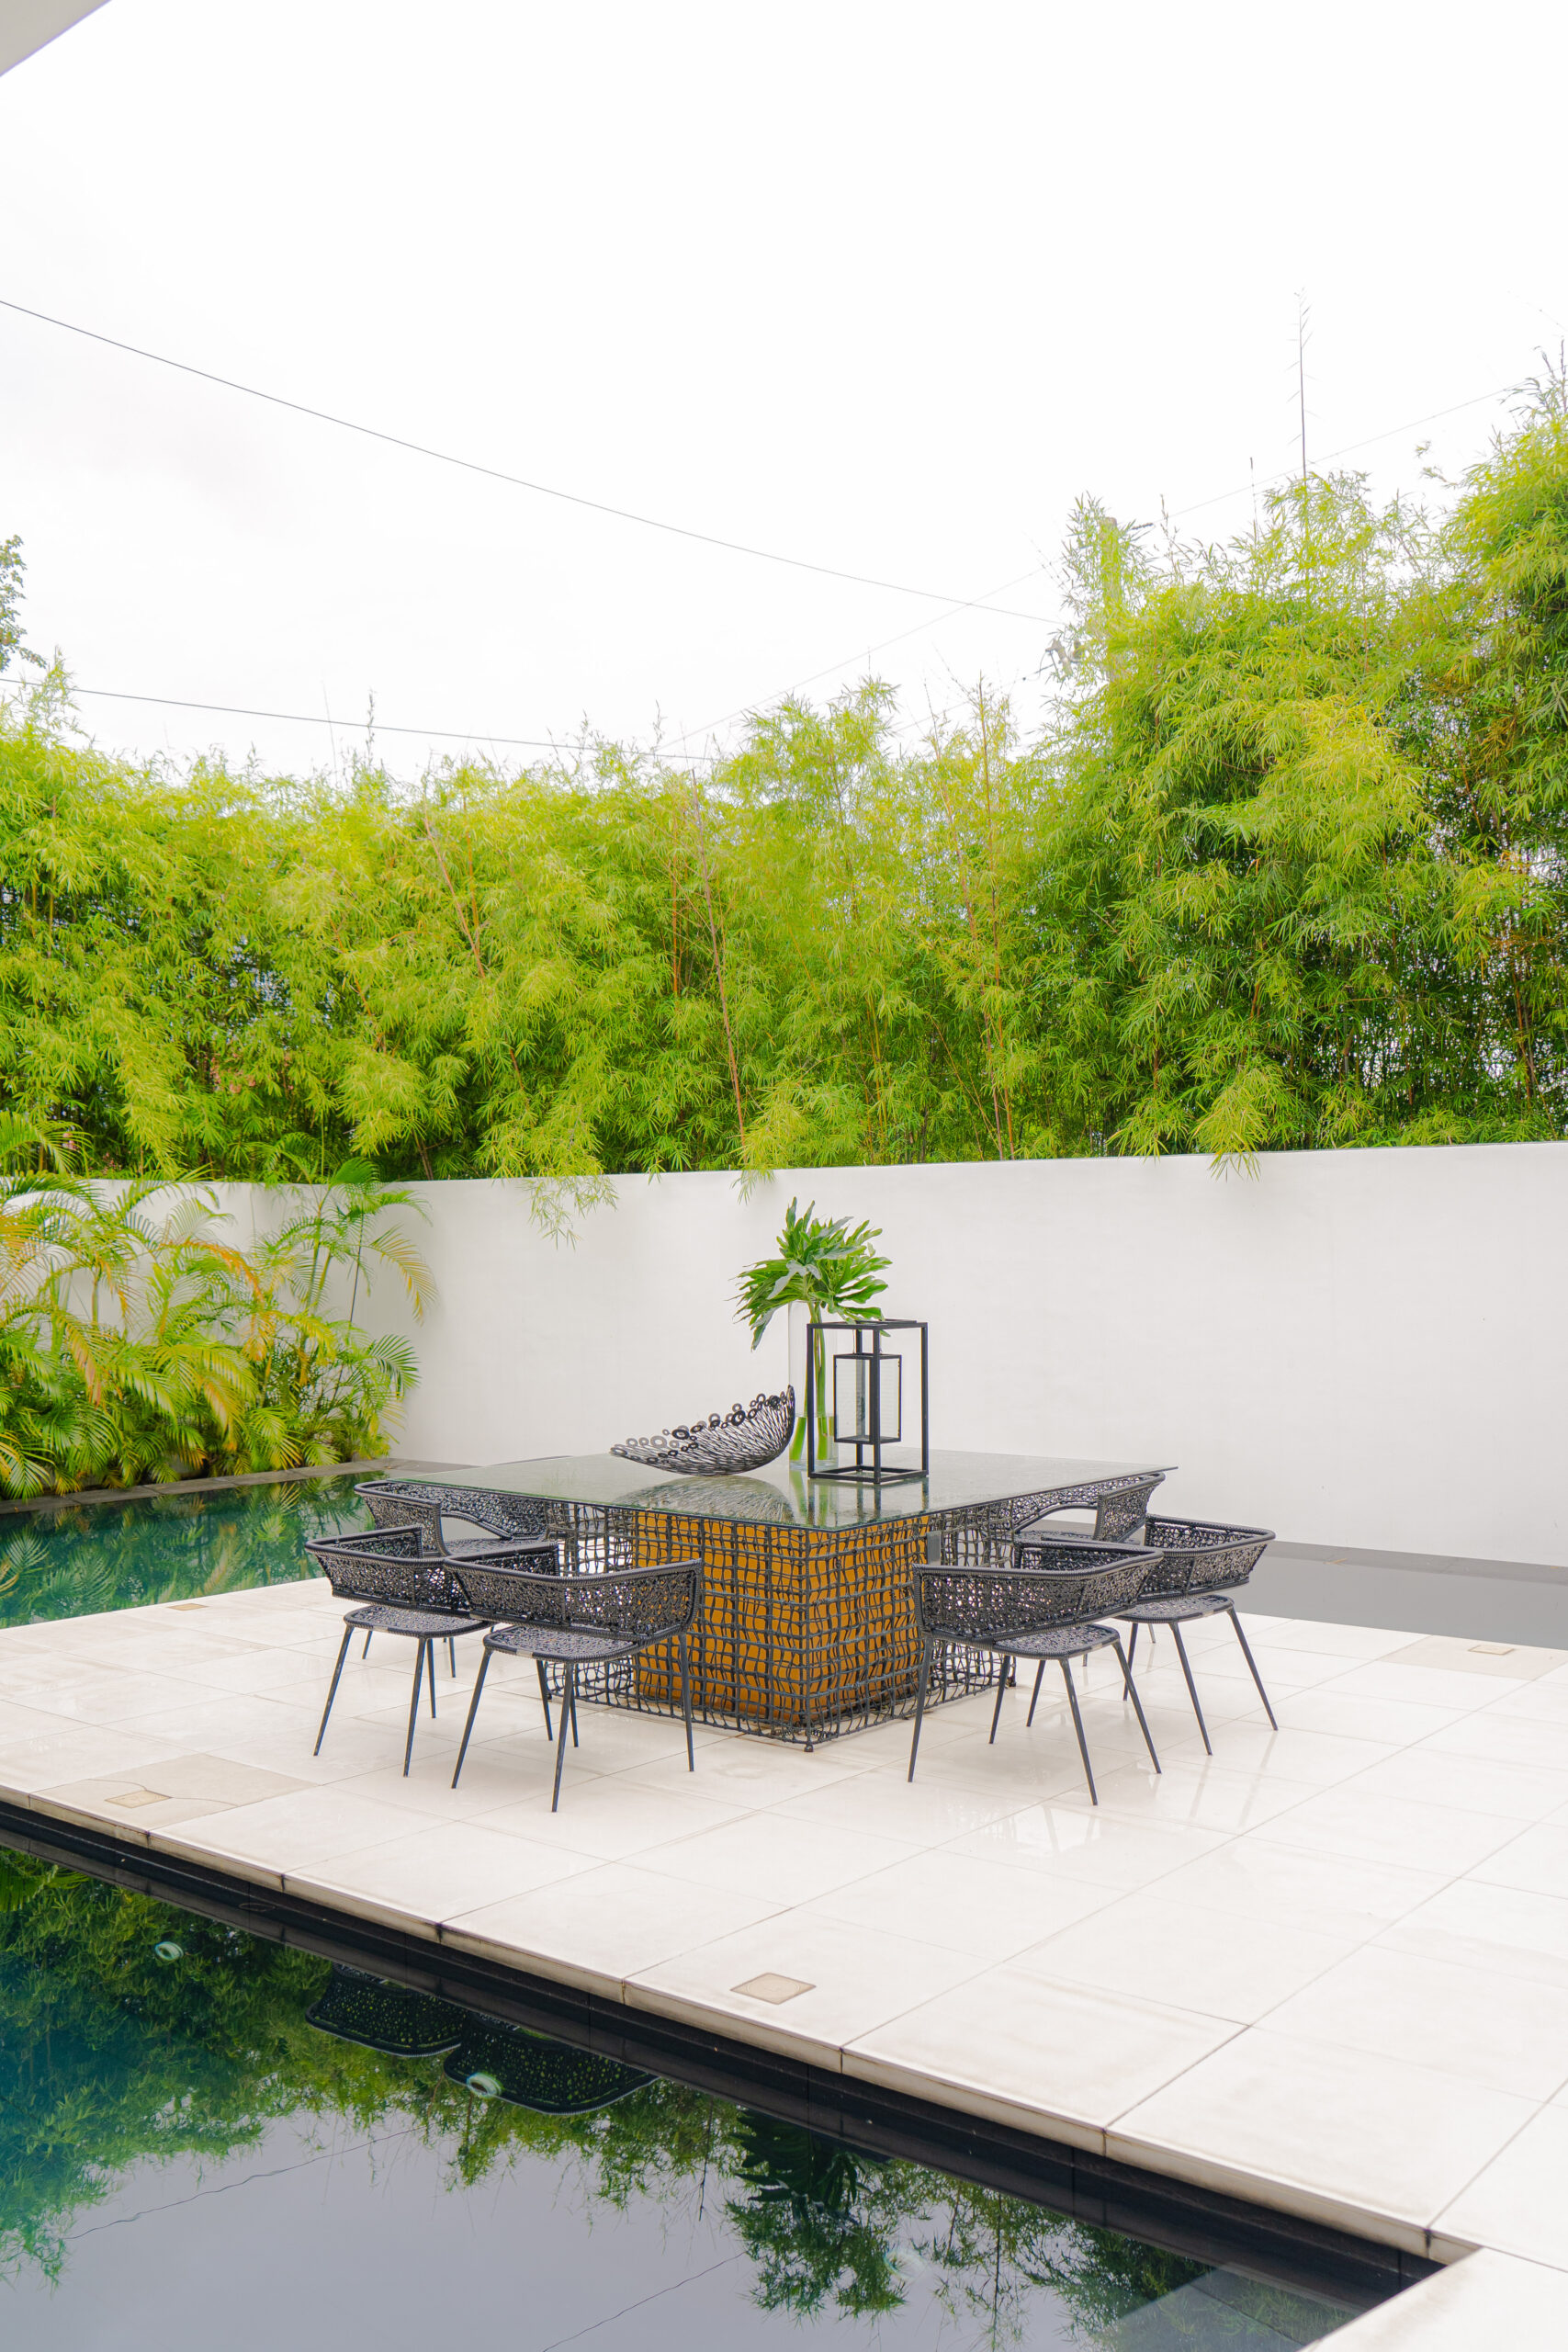 The pool, which surrounds the outdoor sitting area and parts of the living room, is a perfect spot to entertain guests